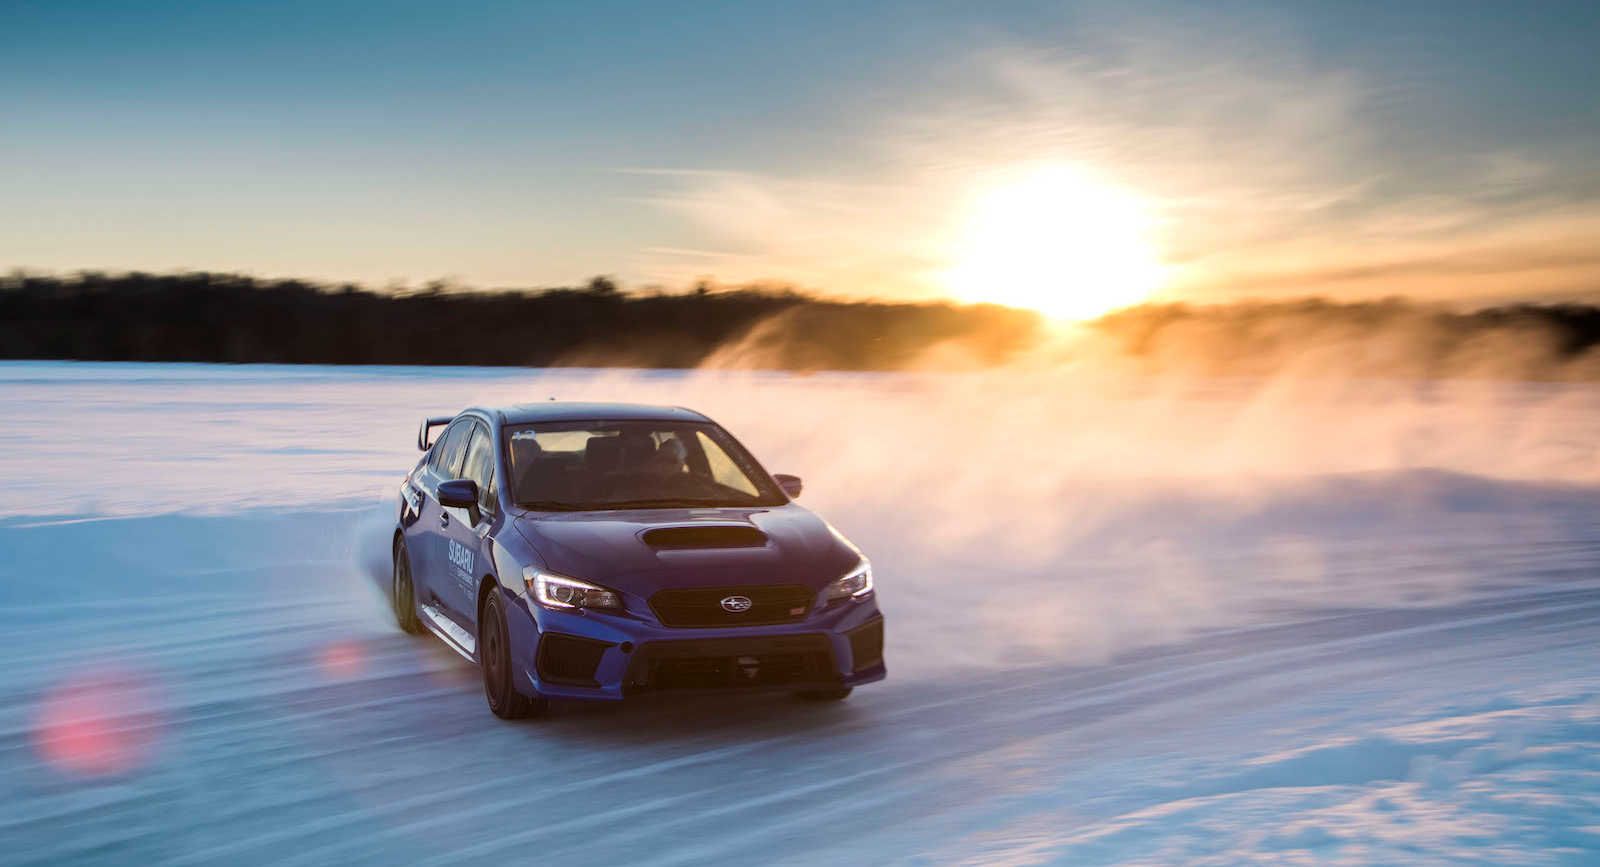 How To Channel Your Inner Rally Driver At Subaru's Winter Experience | Carscoops